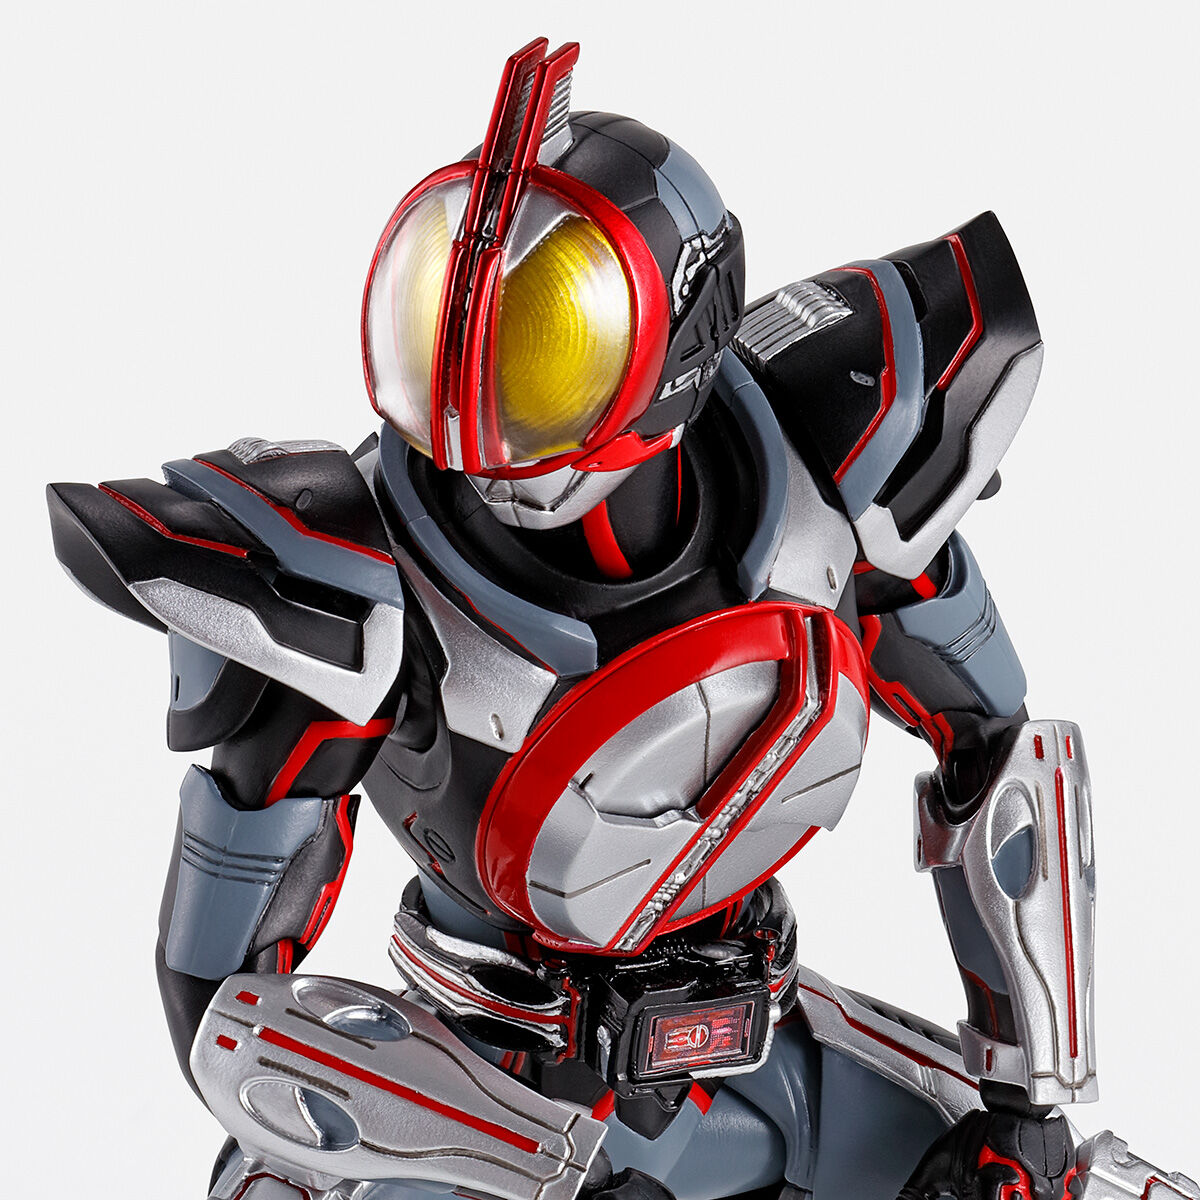 S.H.Figuarts（真骨彫製法） 仮面ライダーネクストファイズ | 仮面